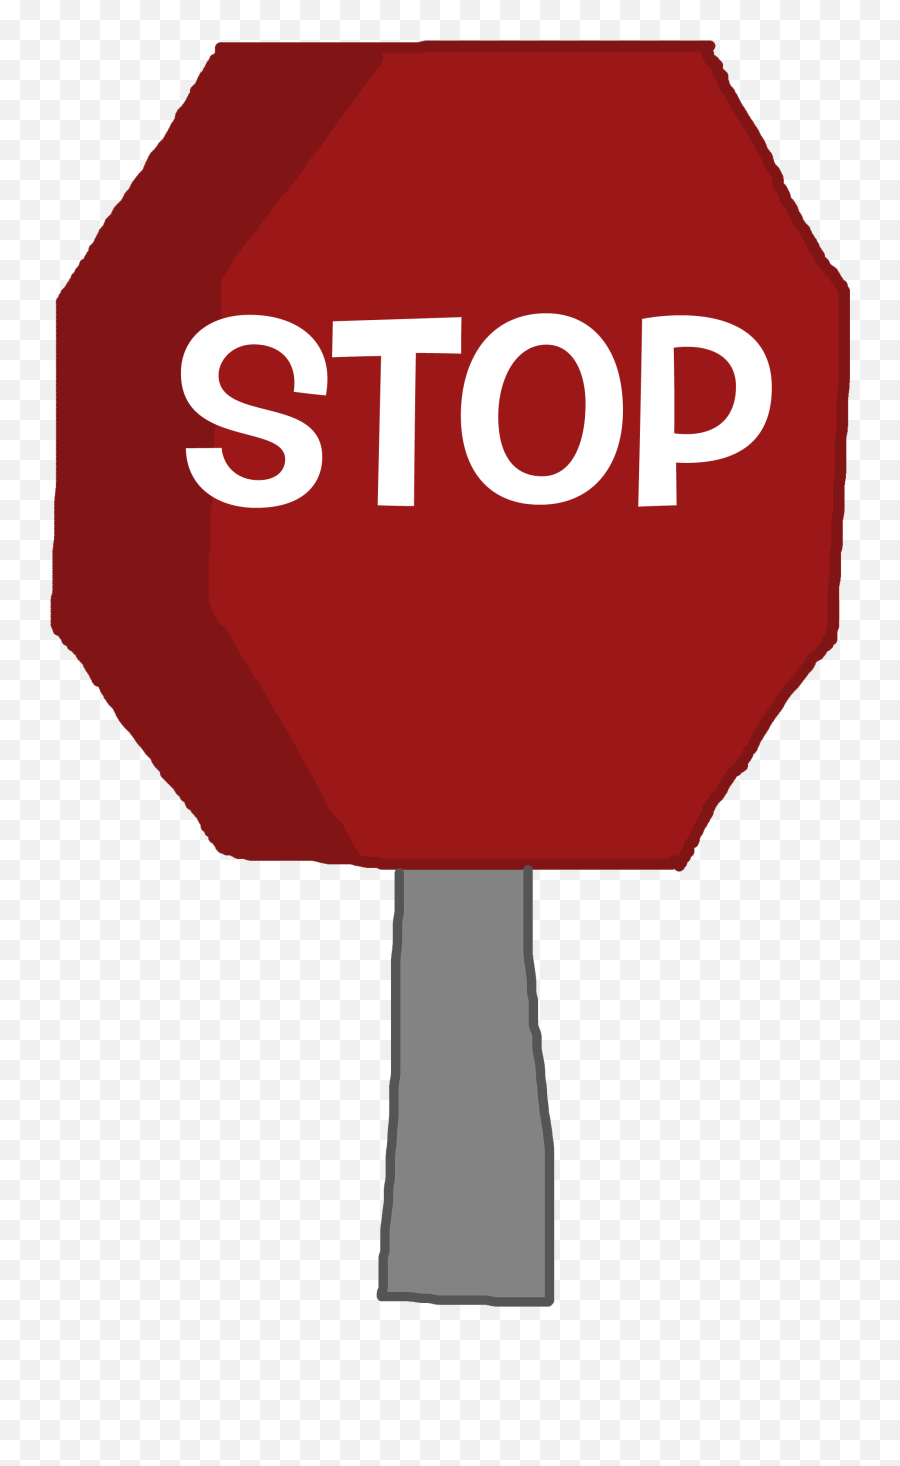 Pictures Of A Stop Sign - Clipart Best Emoji,Stopsign Emoji